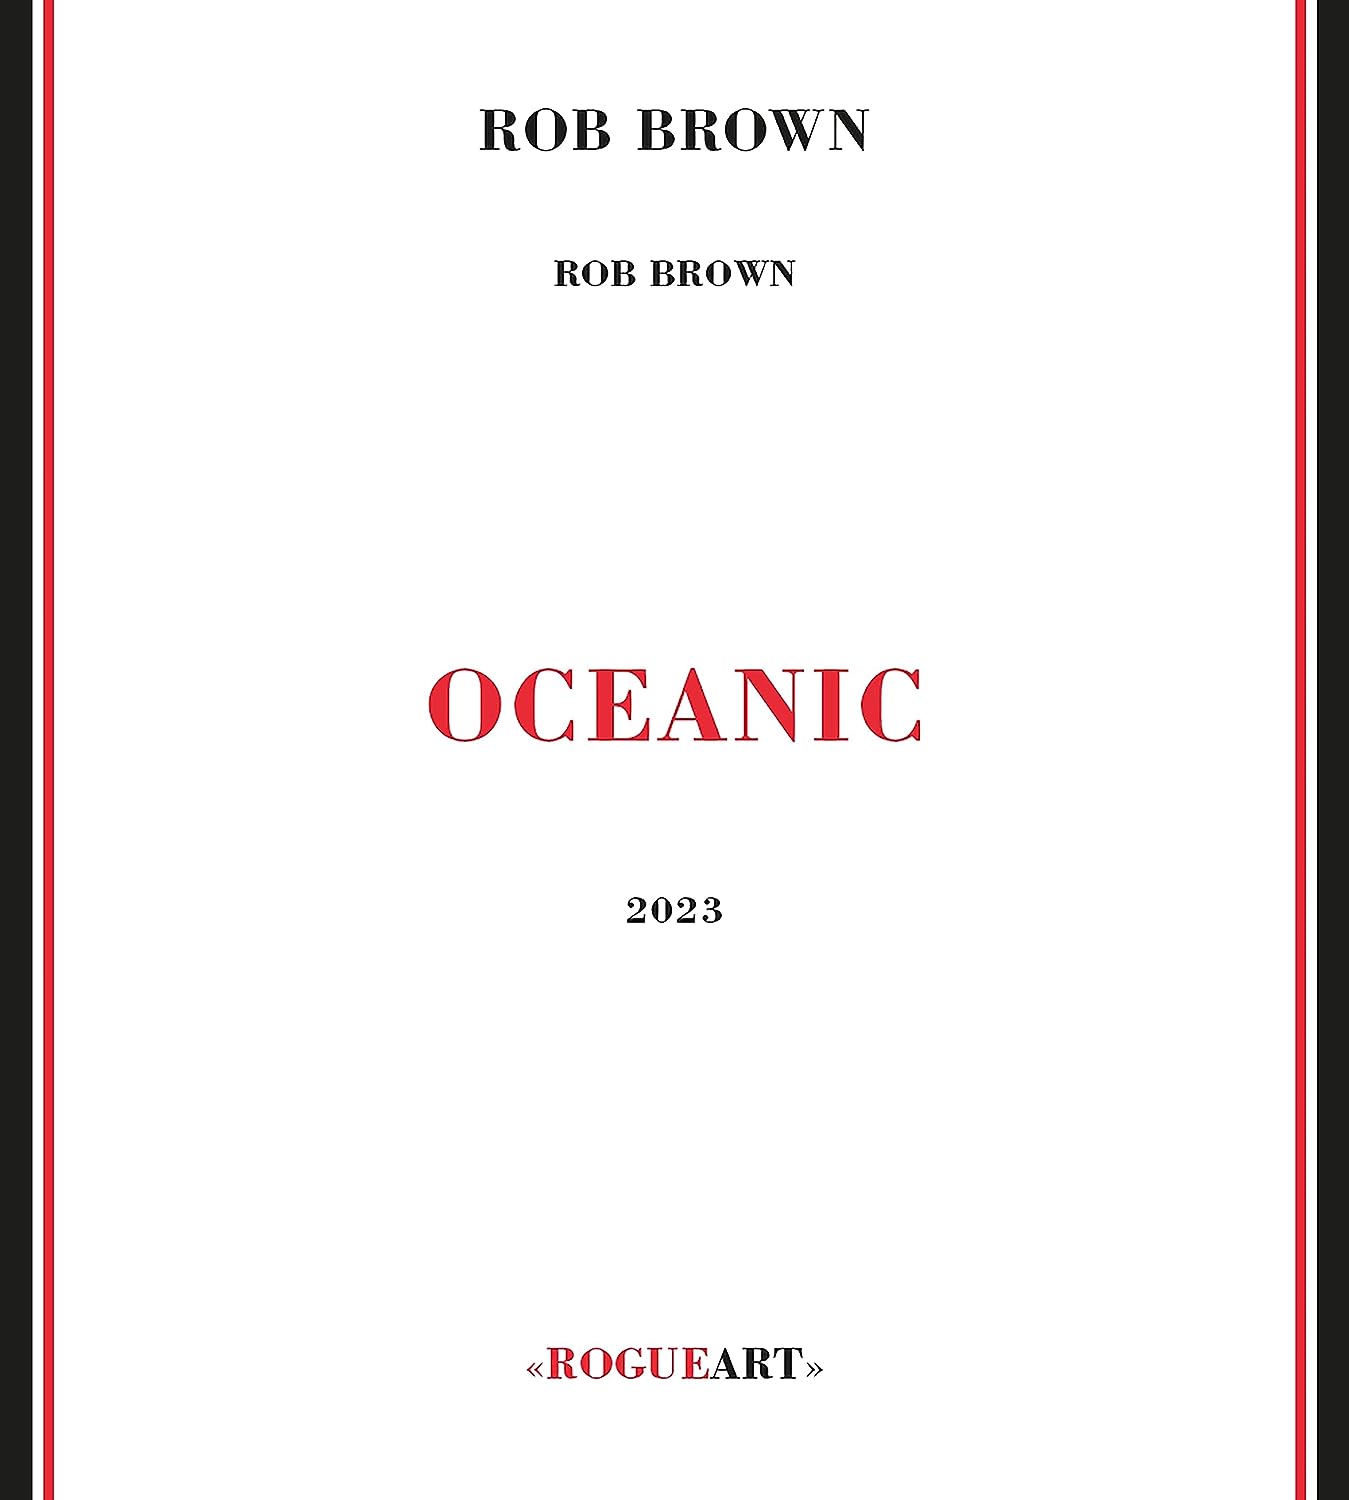 ROB BROWN - Oceanic cover 